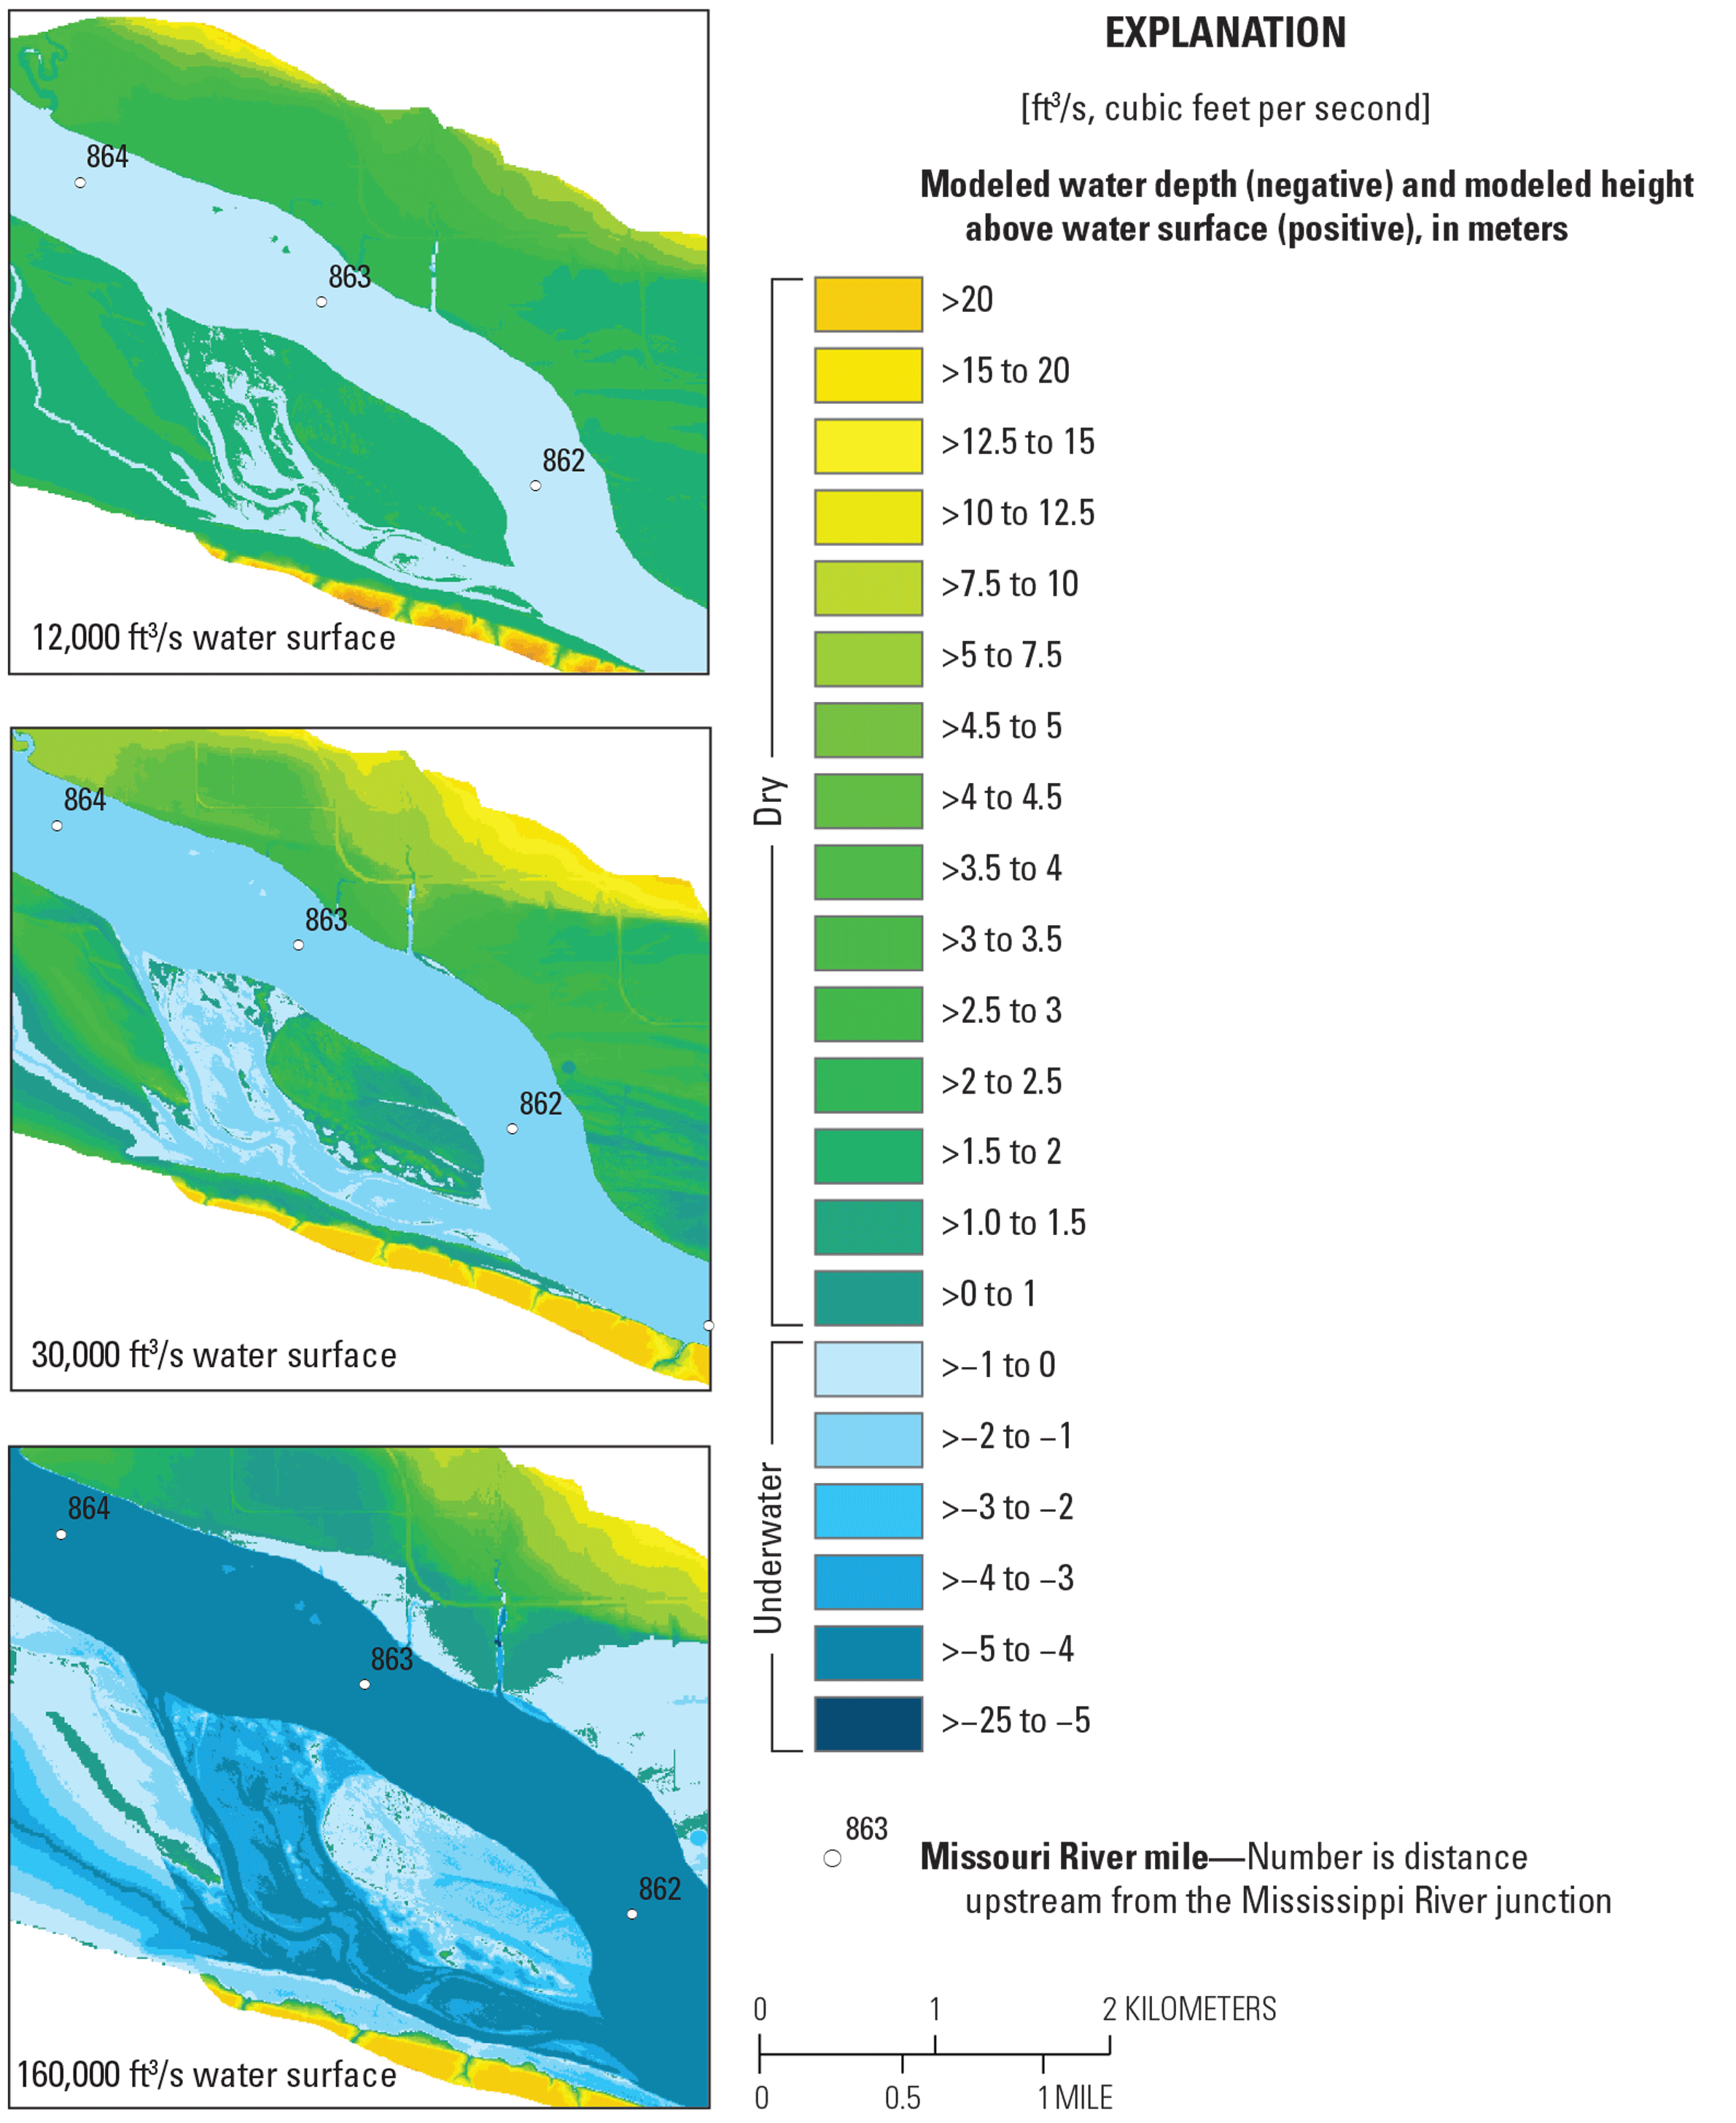 Three maps showing modeled water depth and height with symbols for river miles